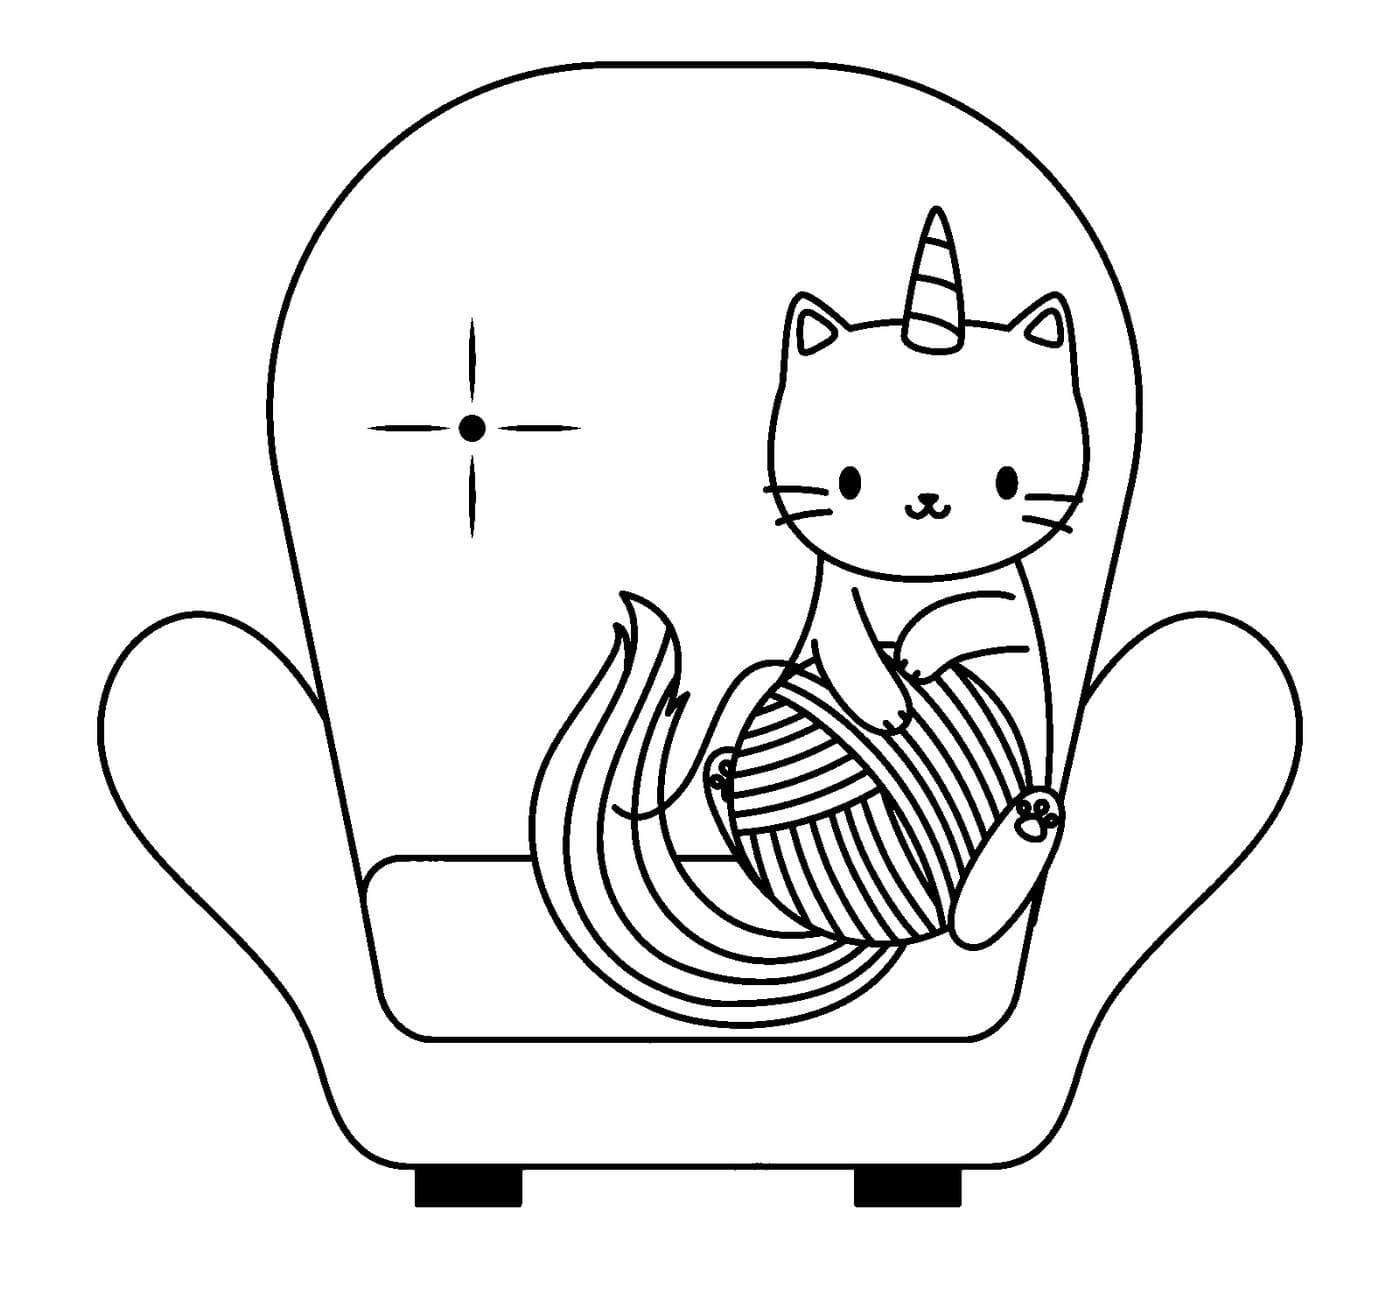 Coloring page Unicorn Cat with a ball